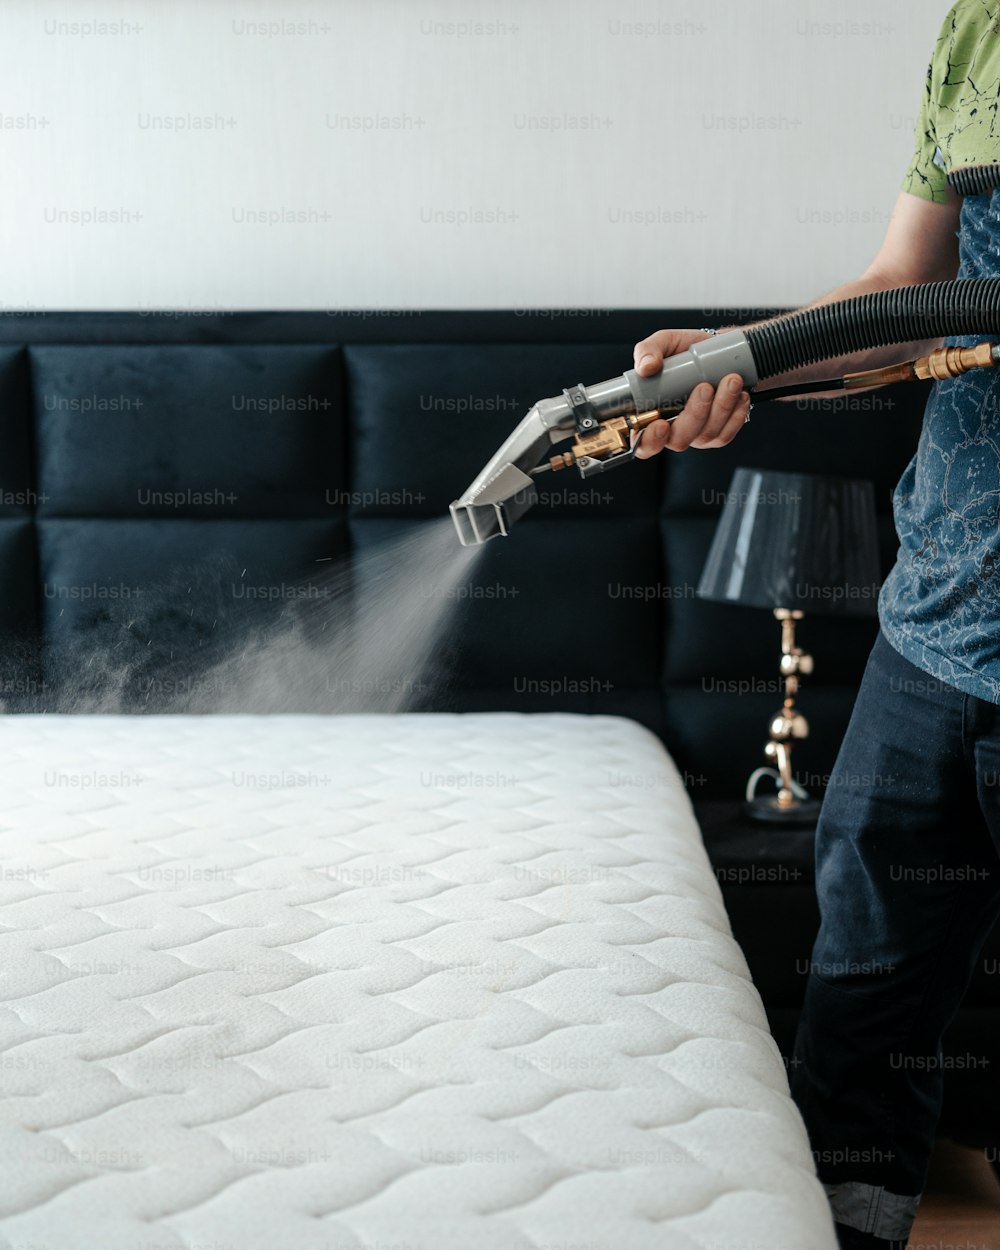 a man vacuuming a mattress with a steam cleaner